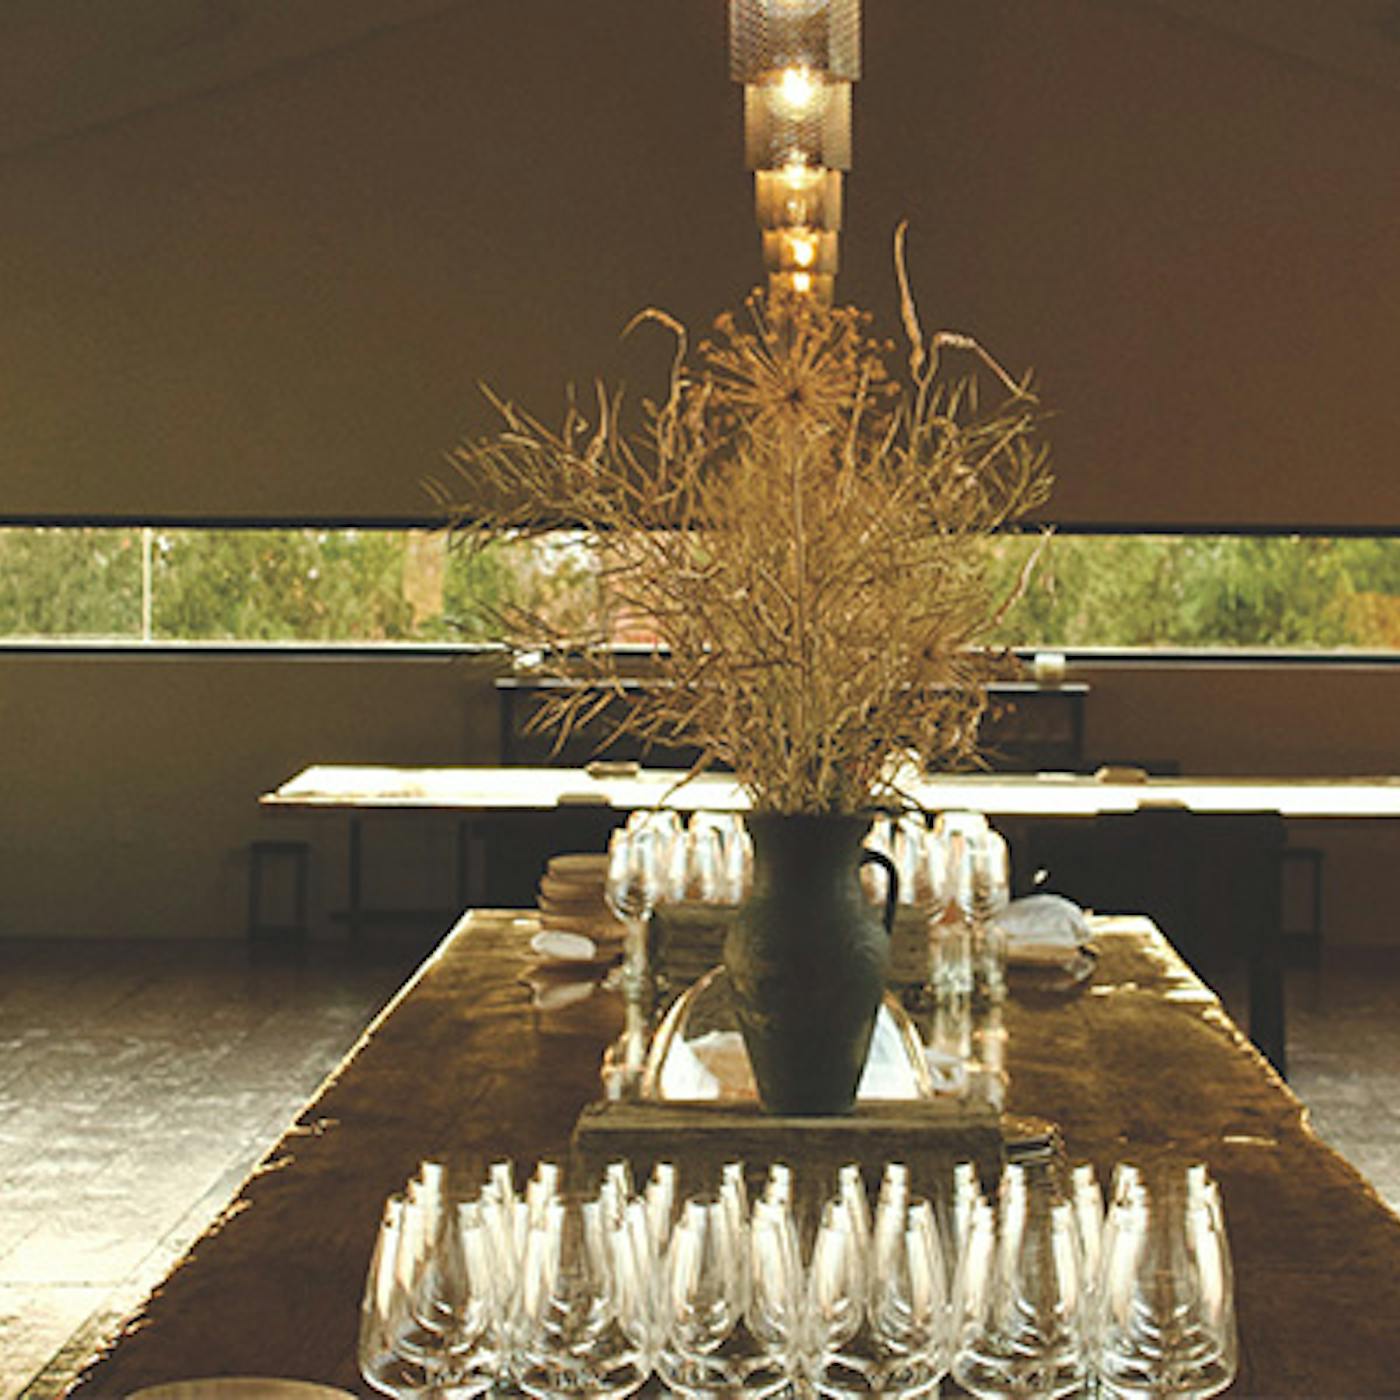 Rustic tables and wine glasses at Restaurant Pearl Morissette in Jordan Station, Ontario (photo courtesy of Restaurant Pearl Morissette))